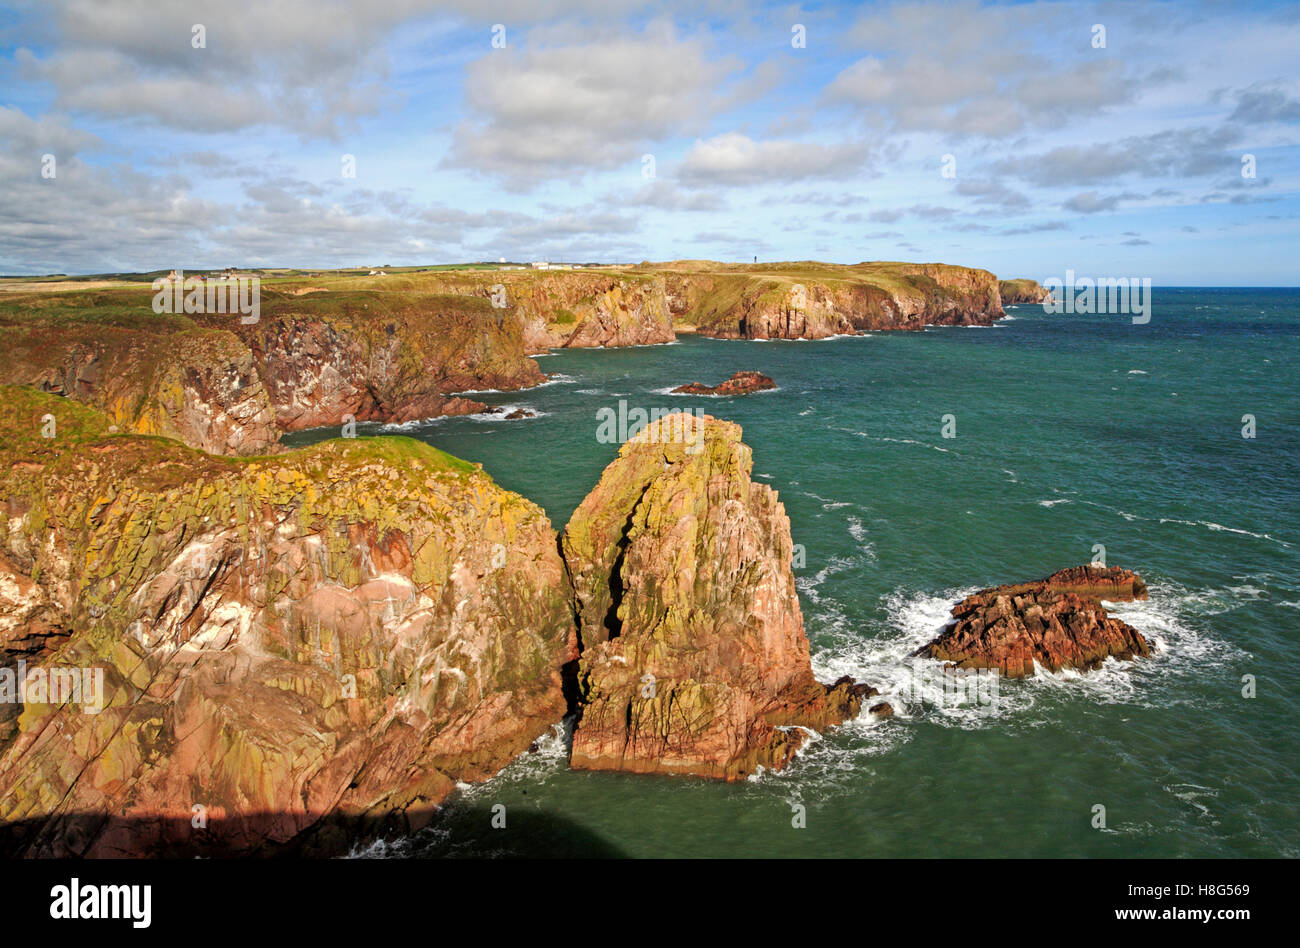 A view of the rocky coastline and coastal features at Bullers of Buchan, Aberdeenshire, Scotland, United kingdom. Stock Photo